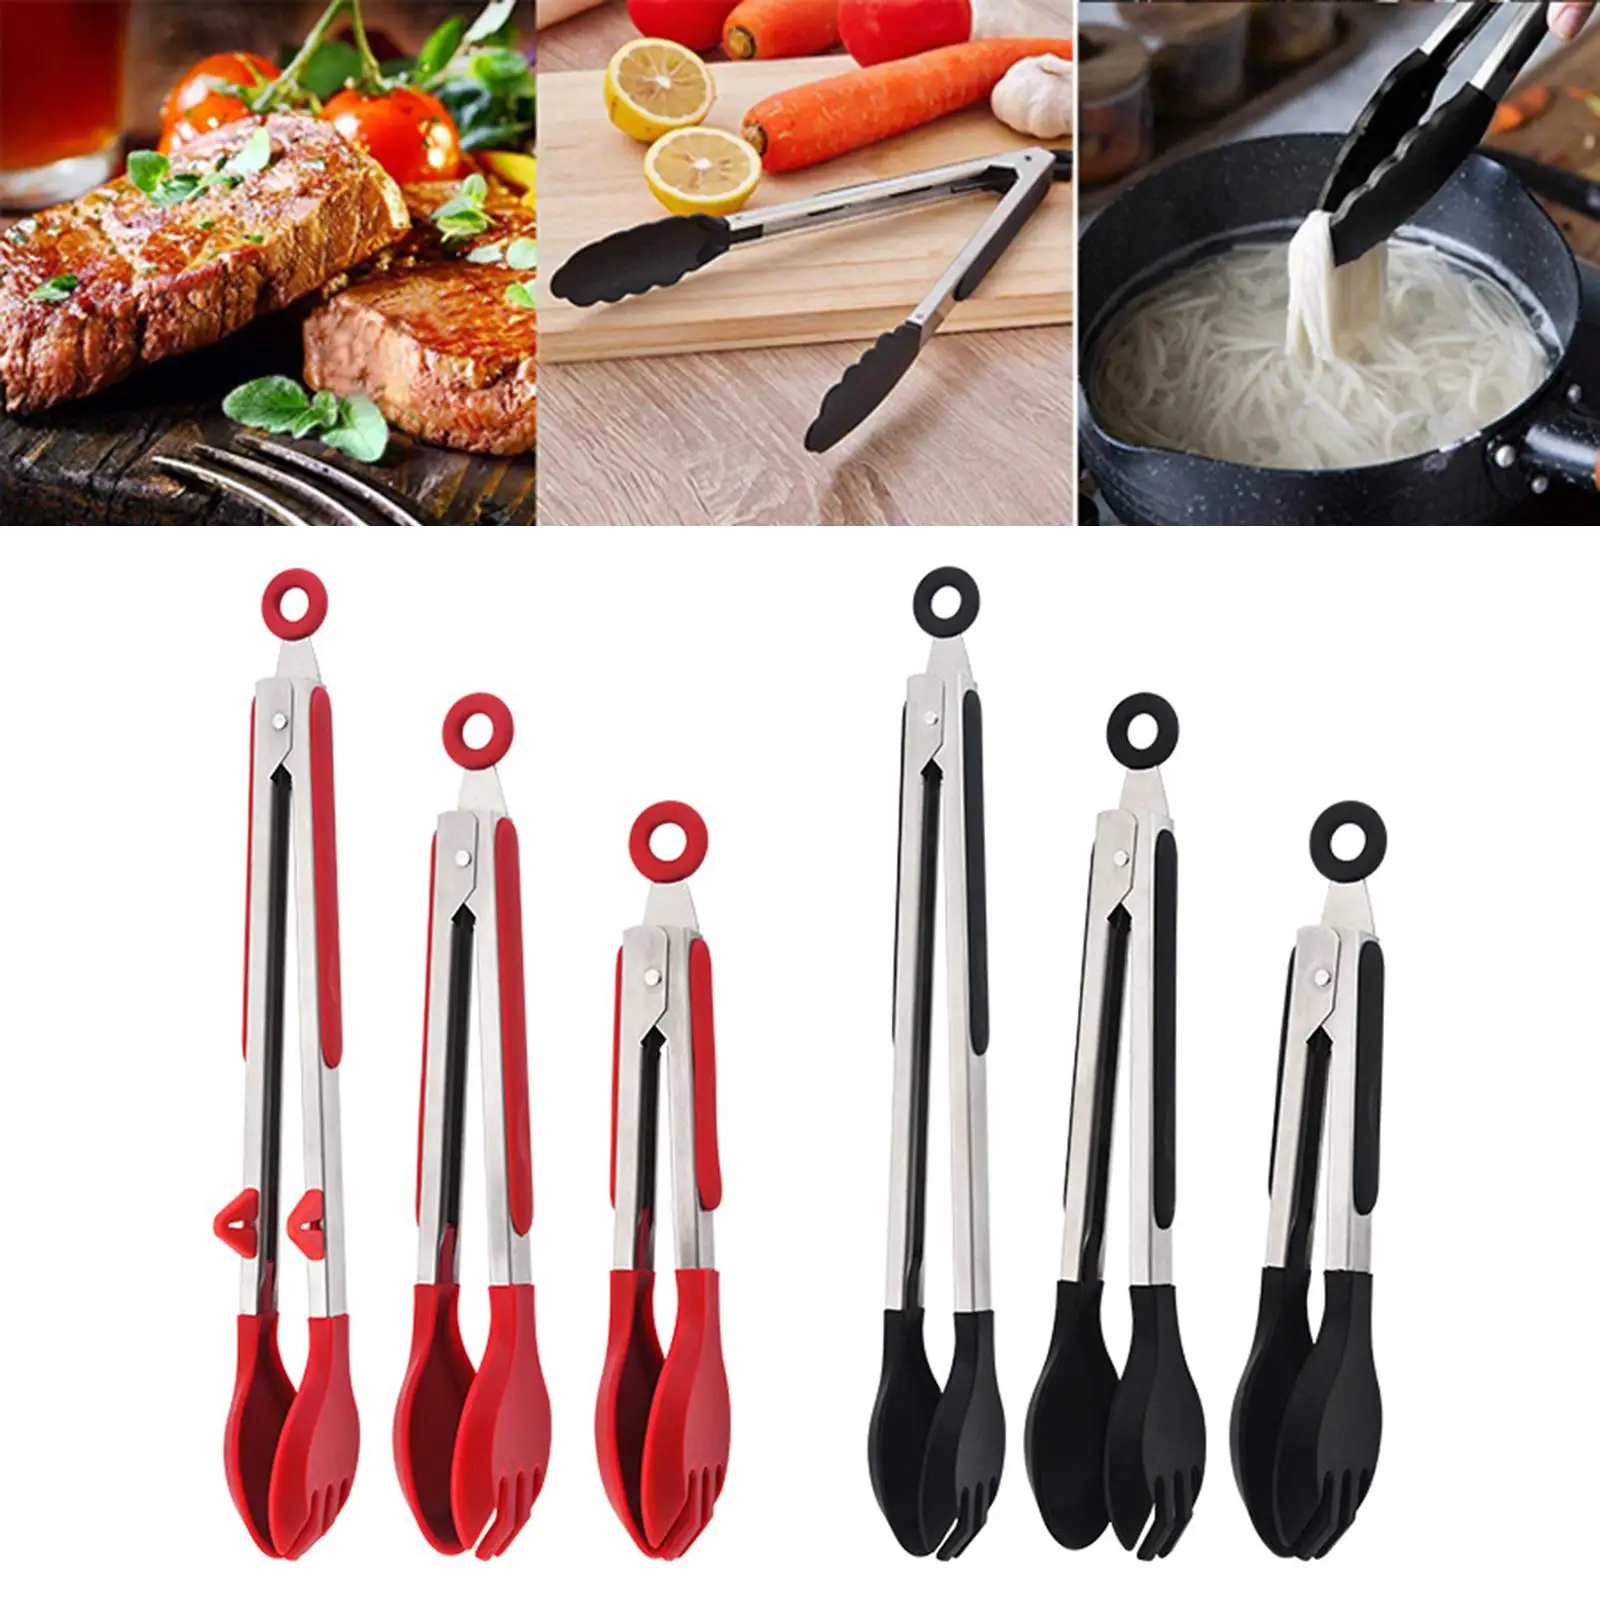 Stainless Steel Kitchen Tongs 3pcs Non-slip Salad Frying Kitchen Cookware